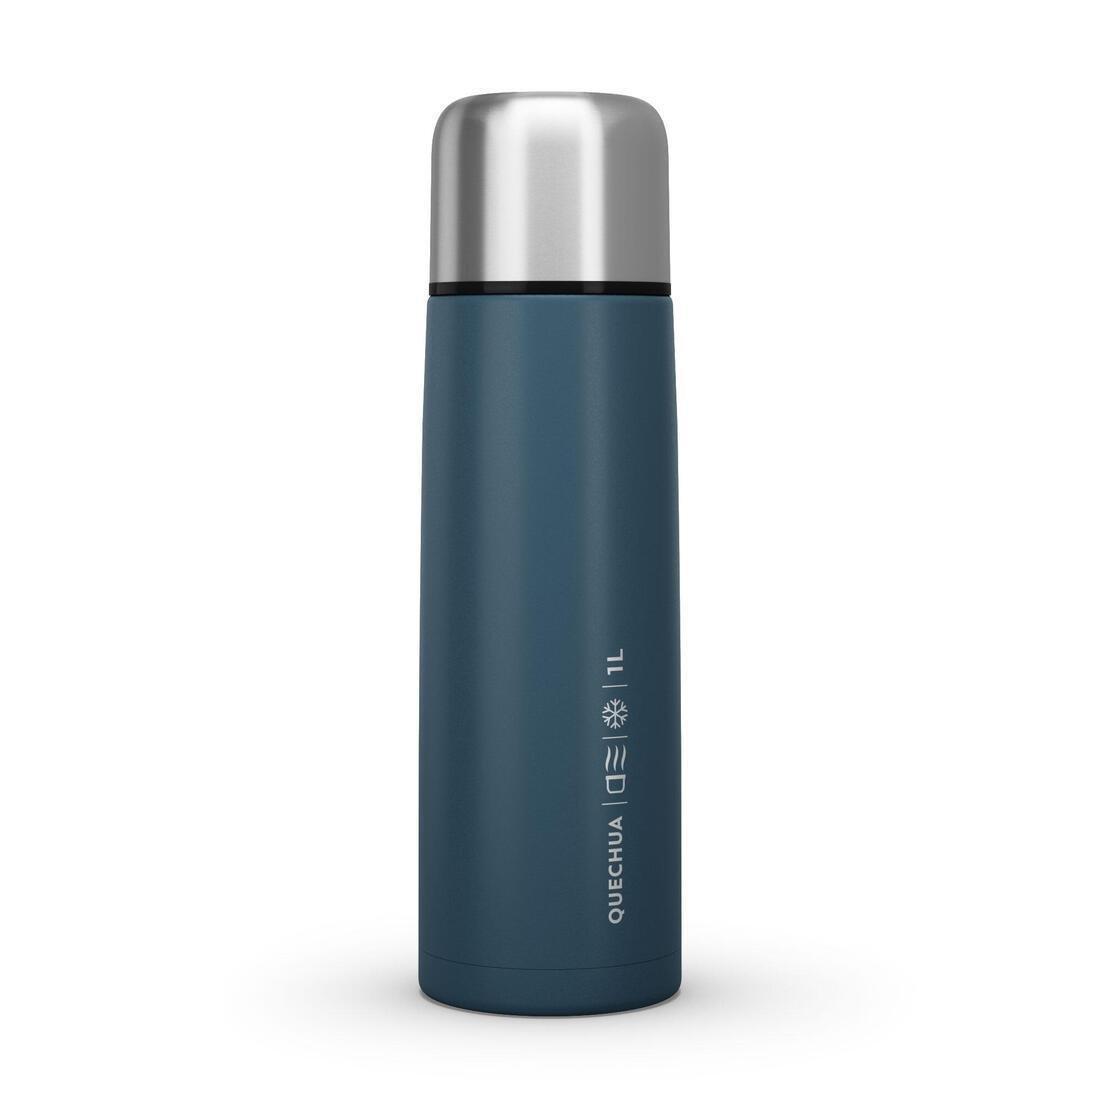 QUECHUA - Stainless Steel Isothermal Bottle - 1L, Blue